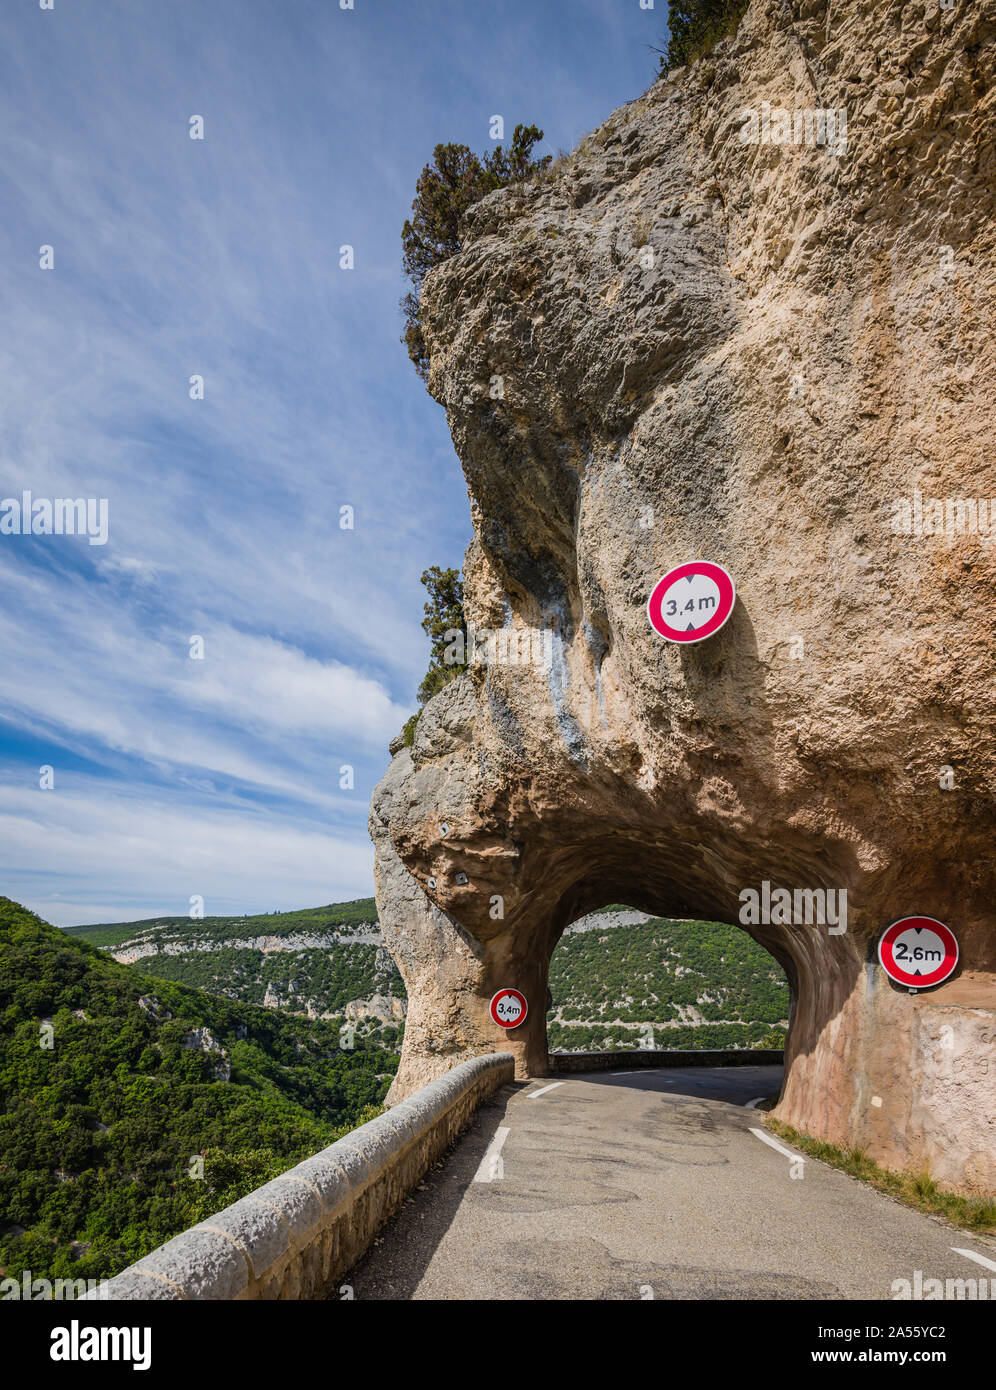 Tunnel on the road through Gorges de la Nesque, Provence, France Stock Photo